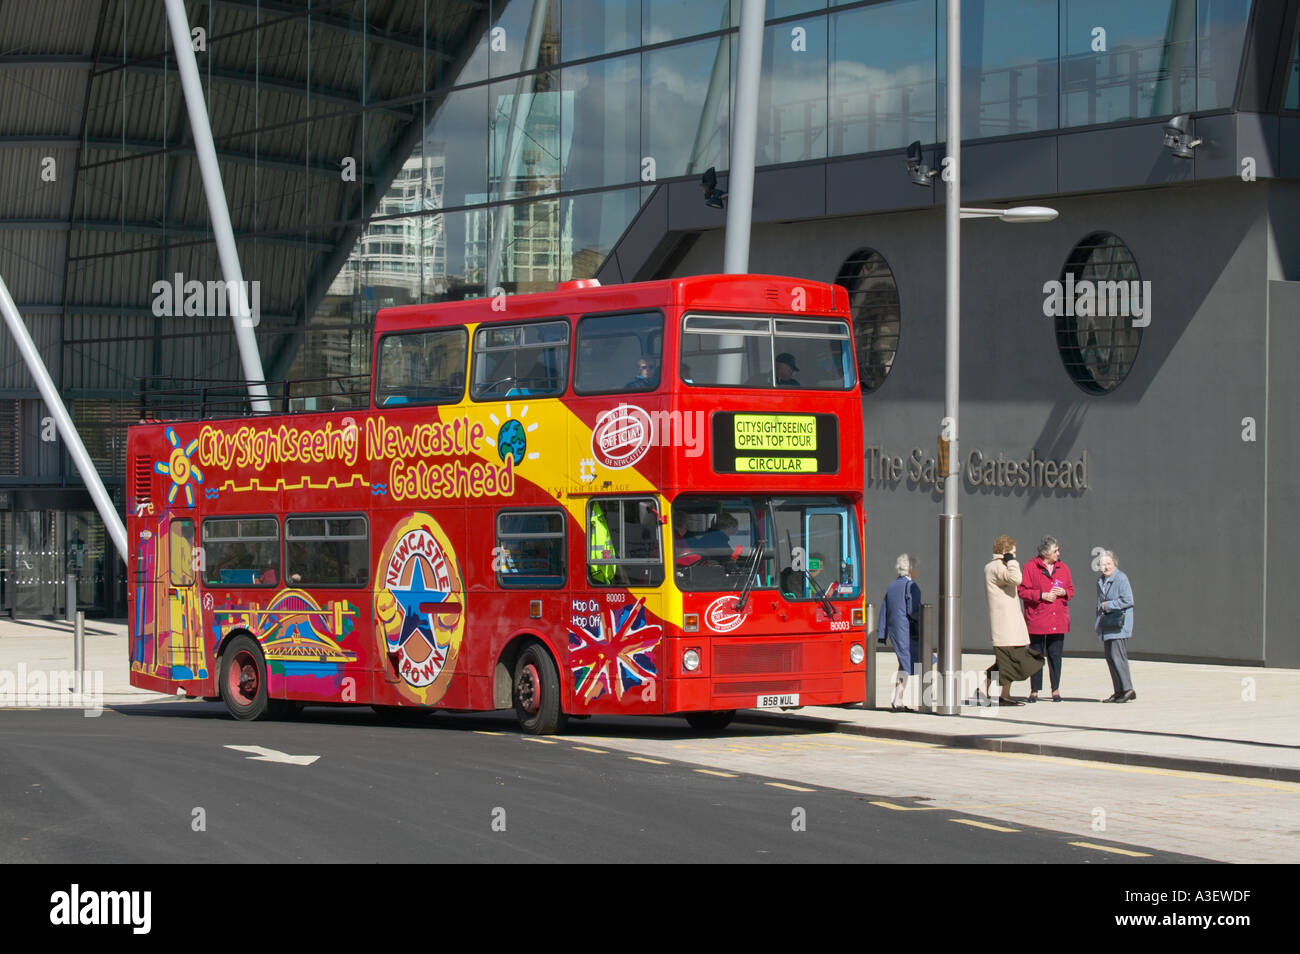 Tourist s sightseeing double decker bus dropping off passengers Stock Photo